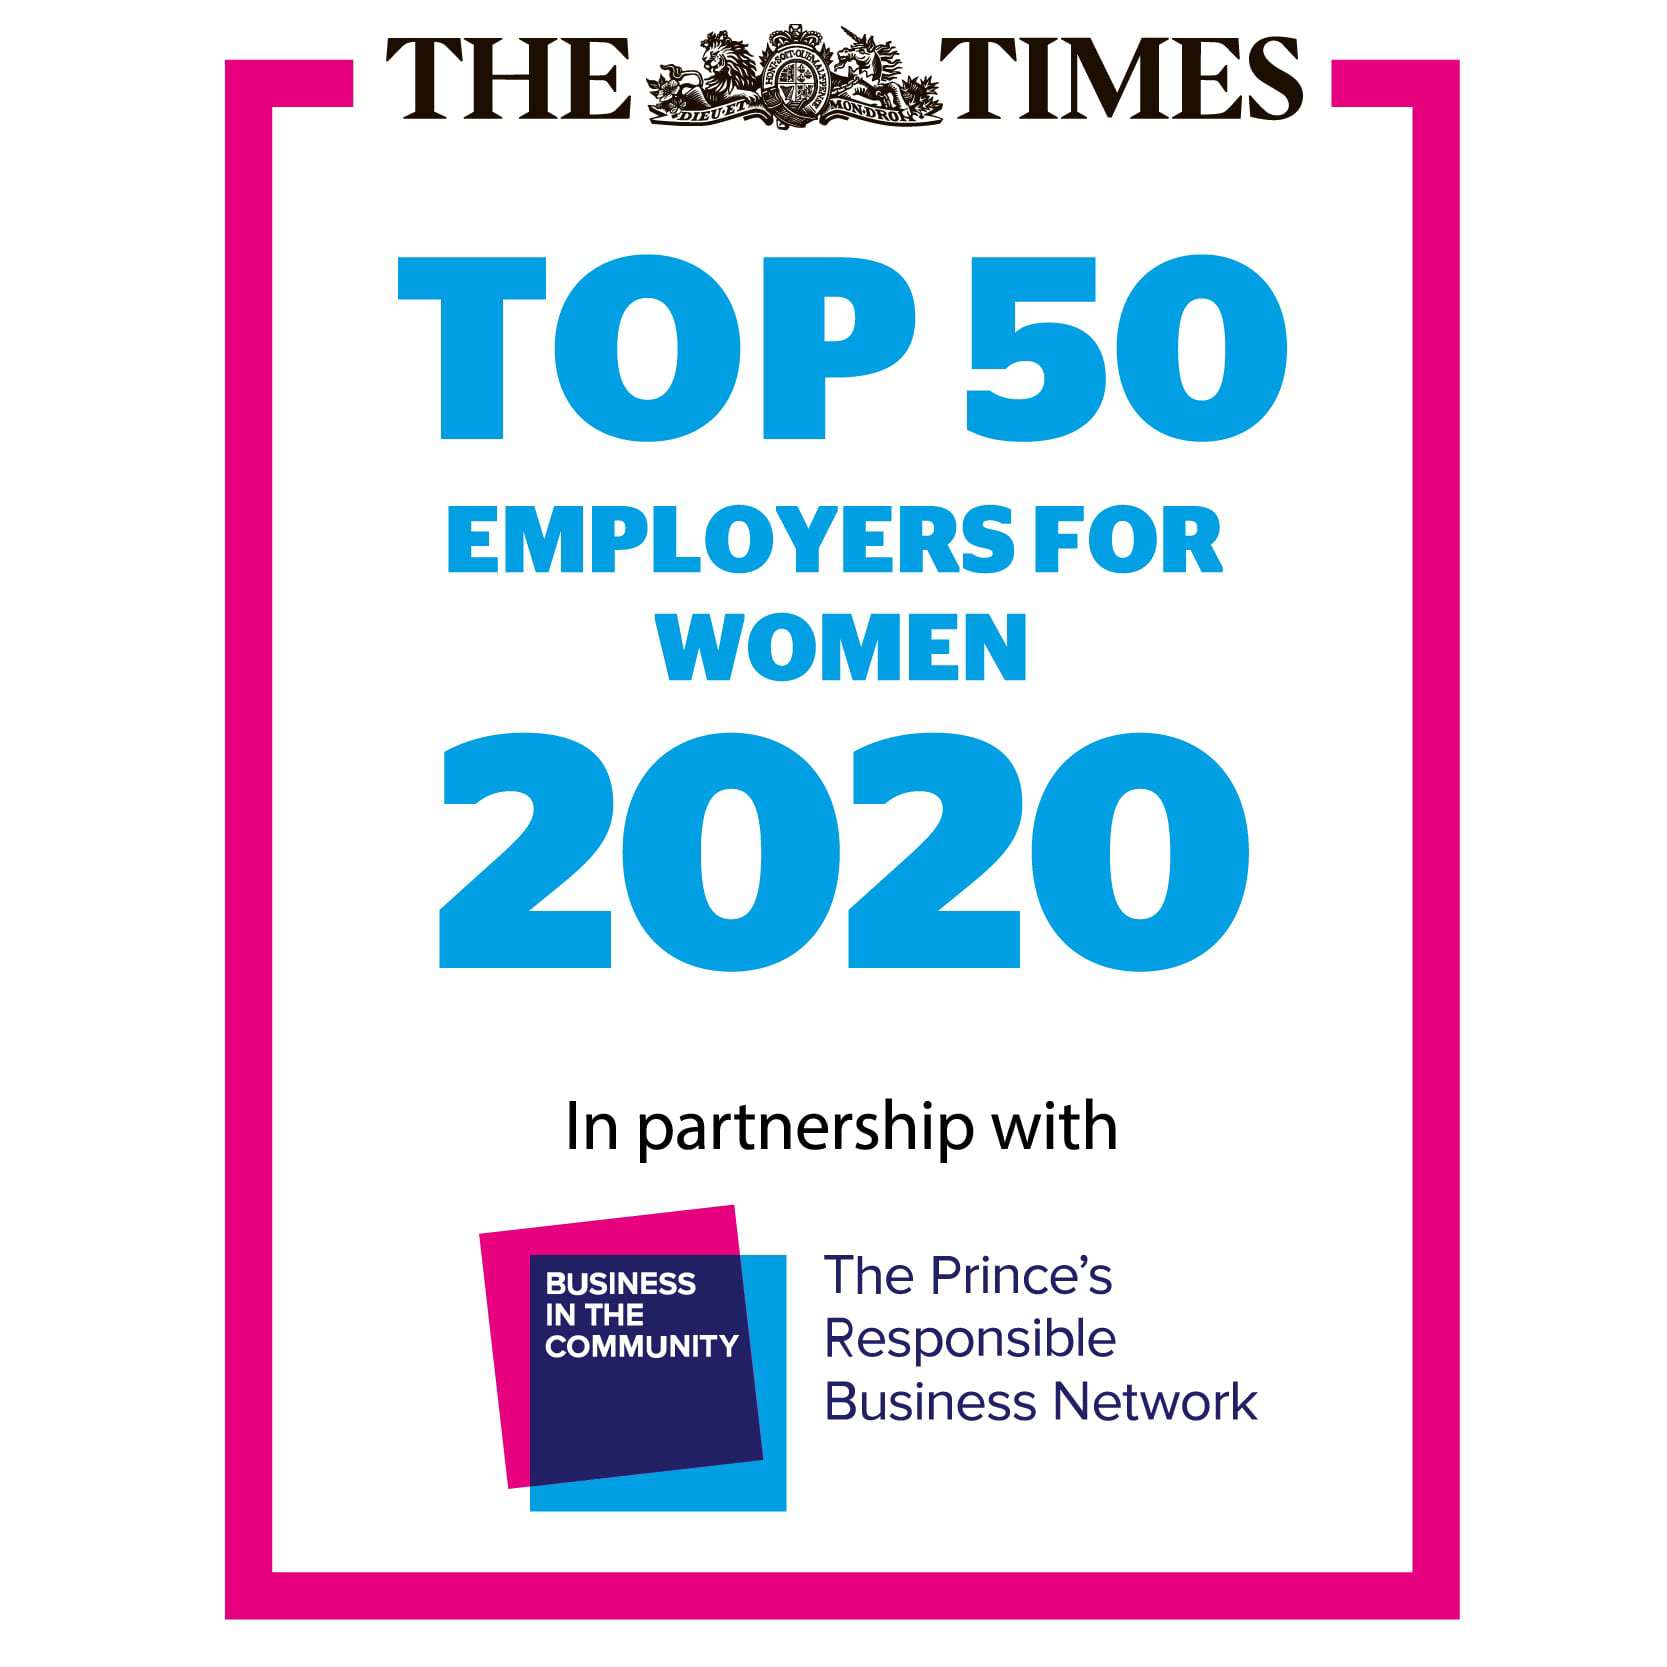 Top 50 employers for women 2020 - the times